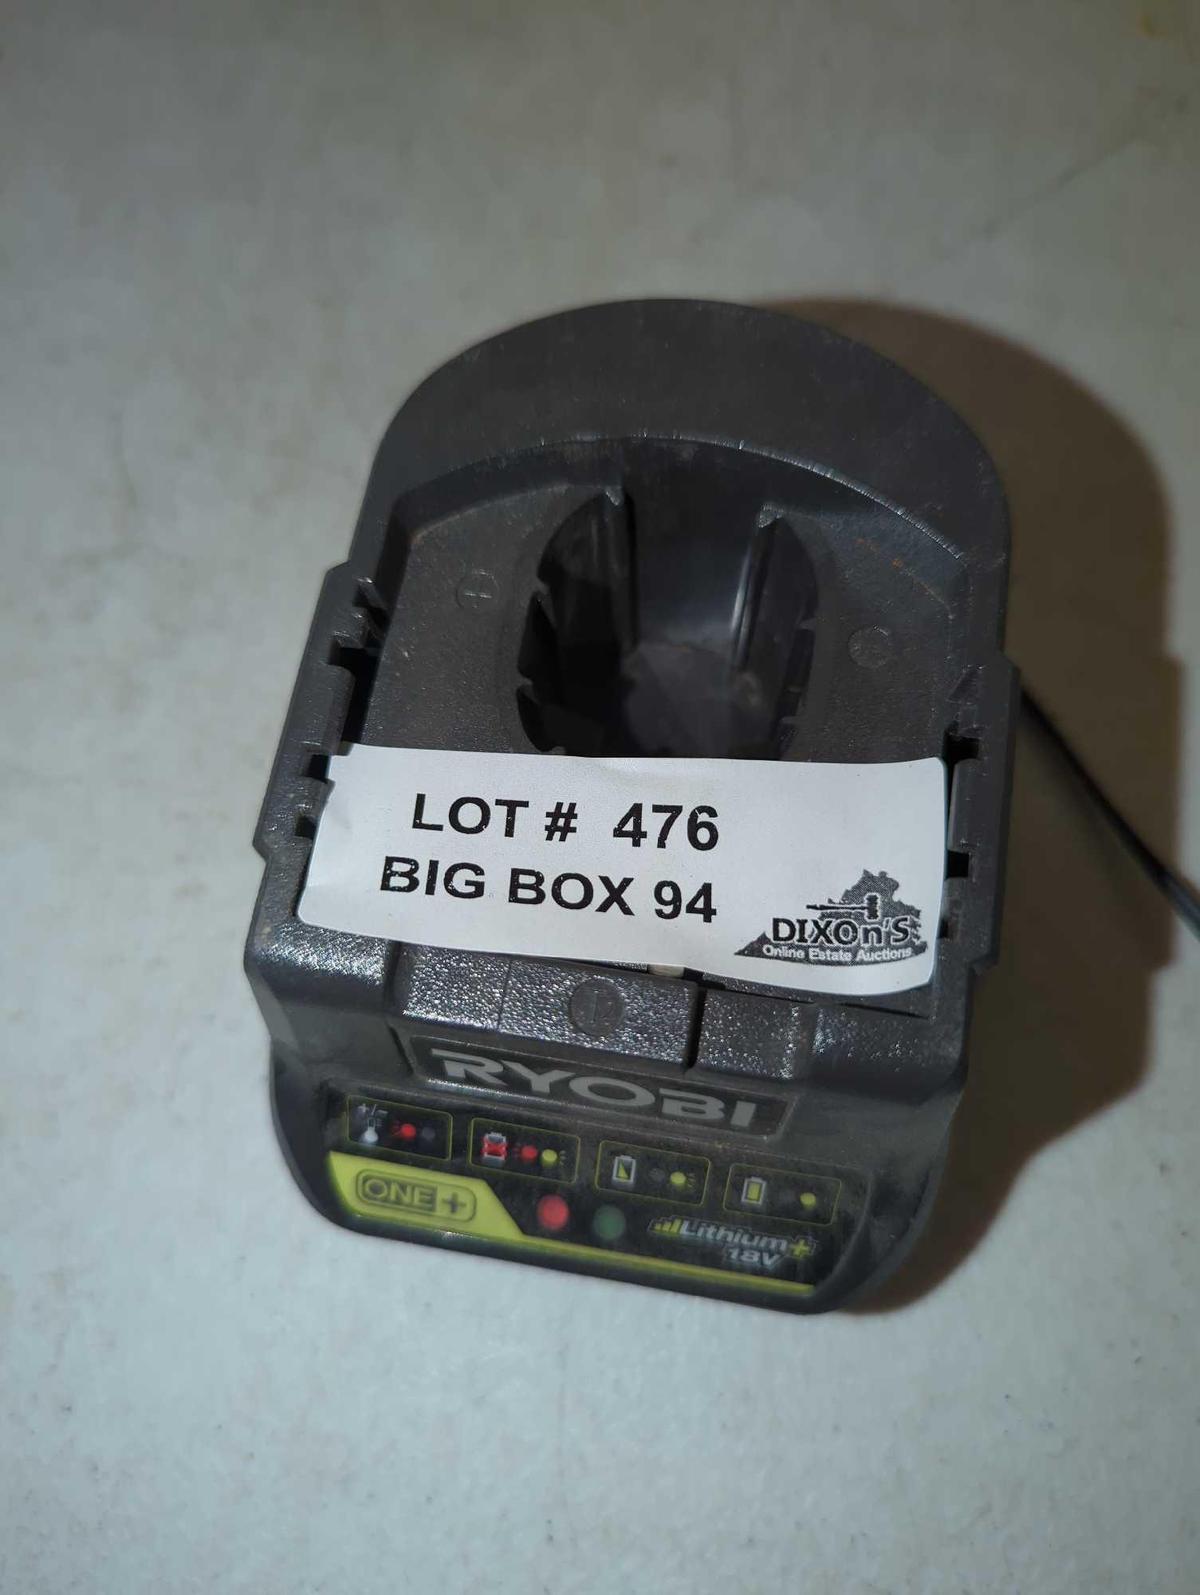 RYOBI (Cord is Cut) 18V Battery Charger, Model P118B, Retail Price $22, Appears to be Used, What You